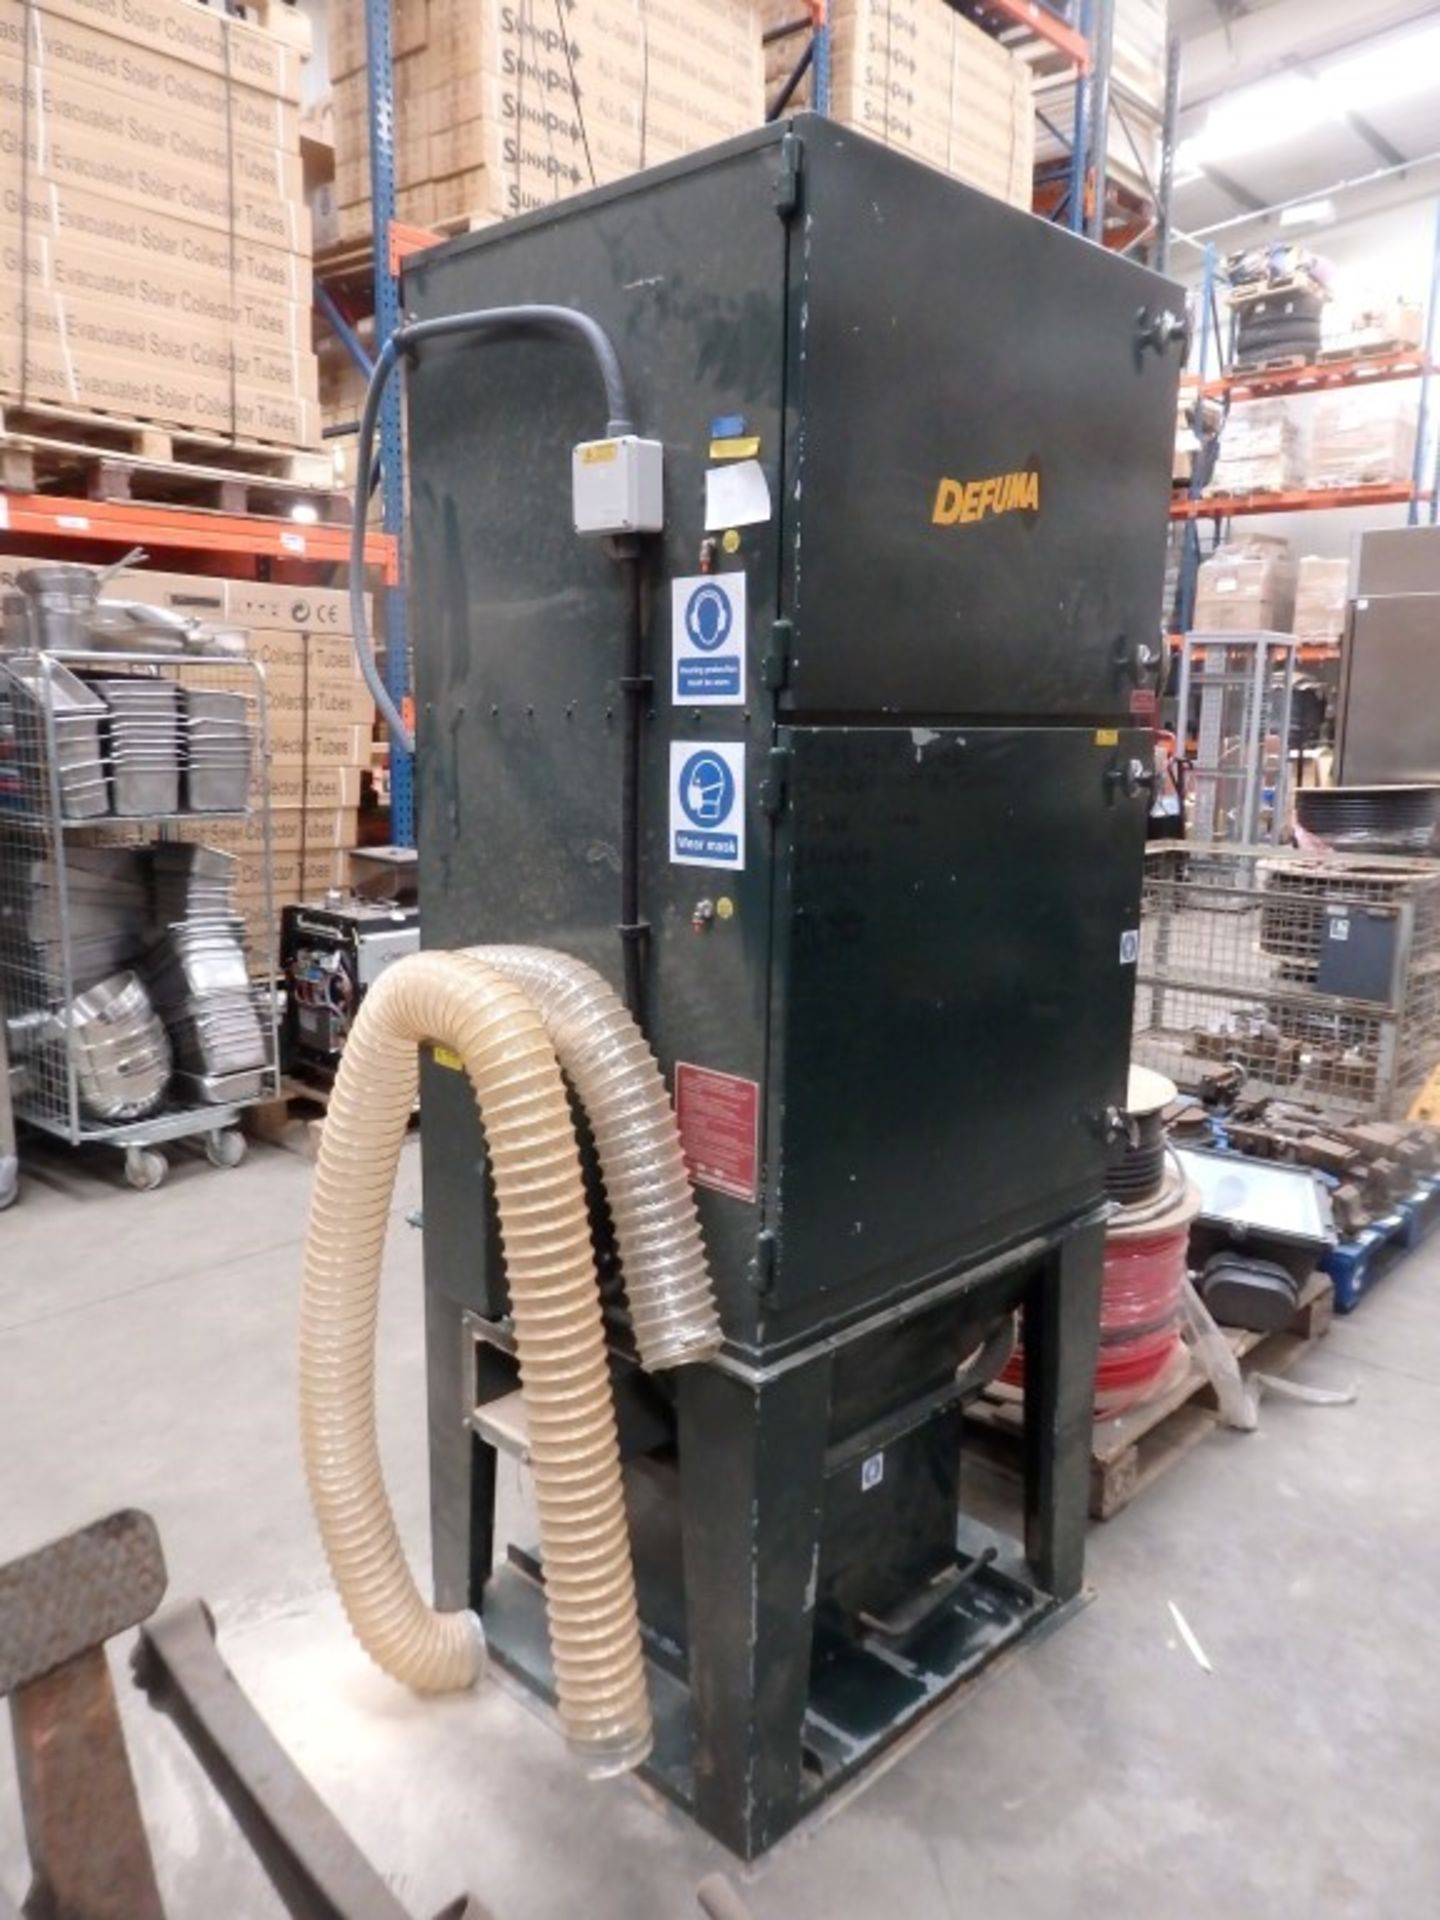 1 x Pefurma Dust Extractor - Compact self-contained unit - CL057 - Ref WPM098 - Location: Welwyn, - Image 8 of 13